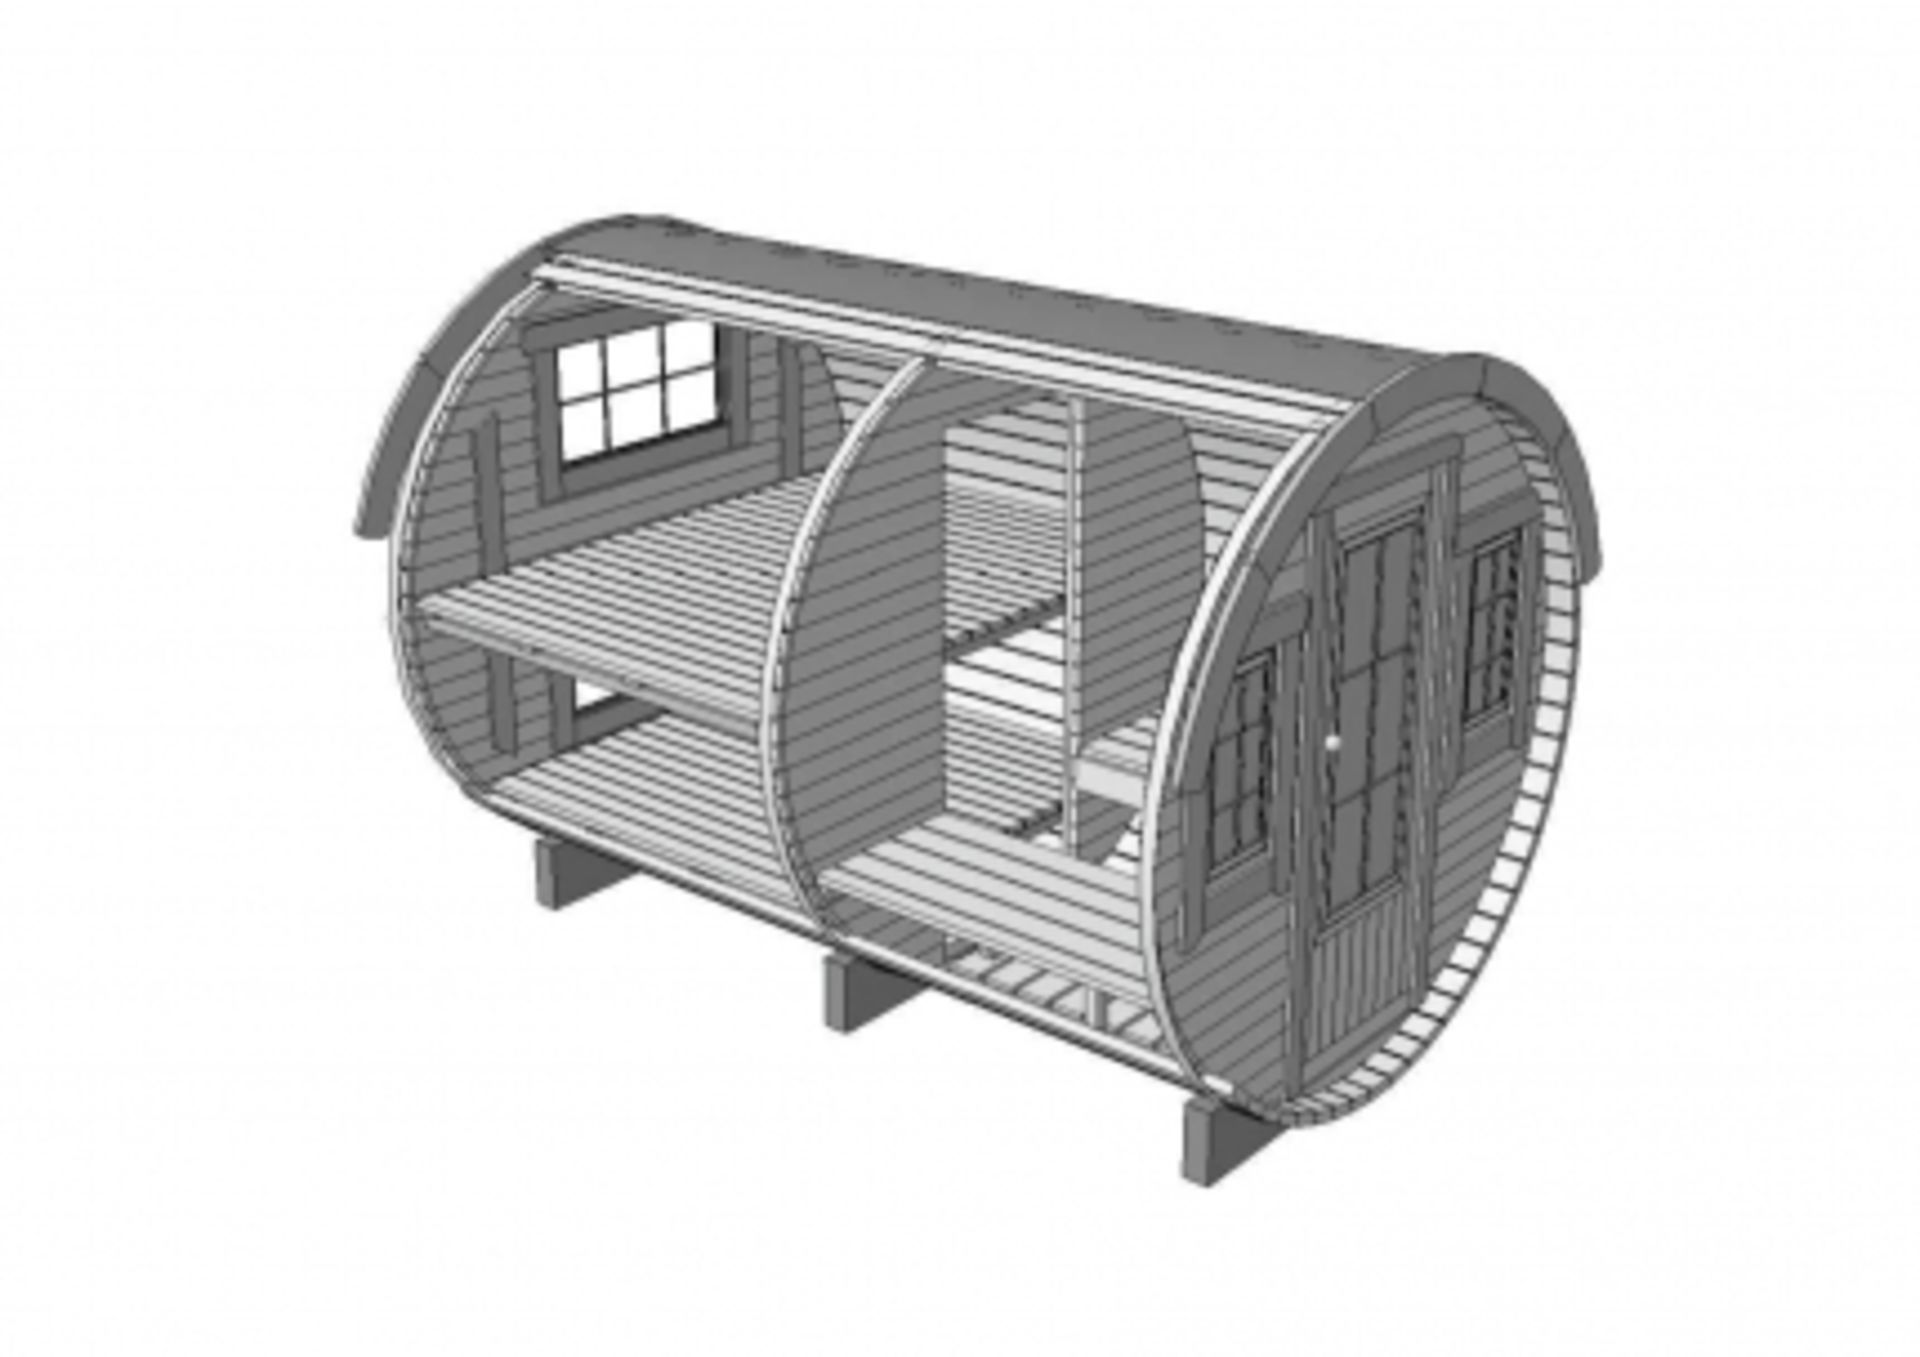 V Brand New 2.2 x 3.3m Barrel For Sleeping - Sleeping & Sitting Rooms Inside - Sleeping Room With - Image 3 of 3